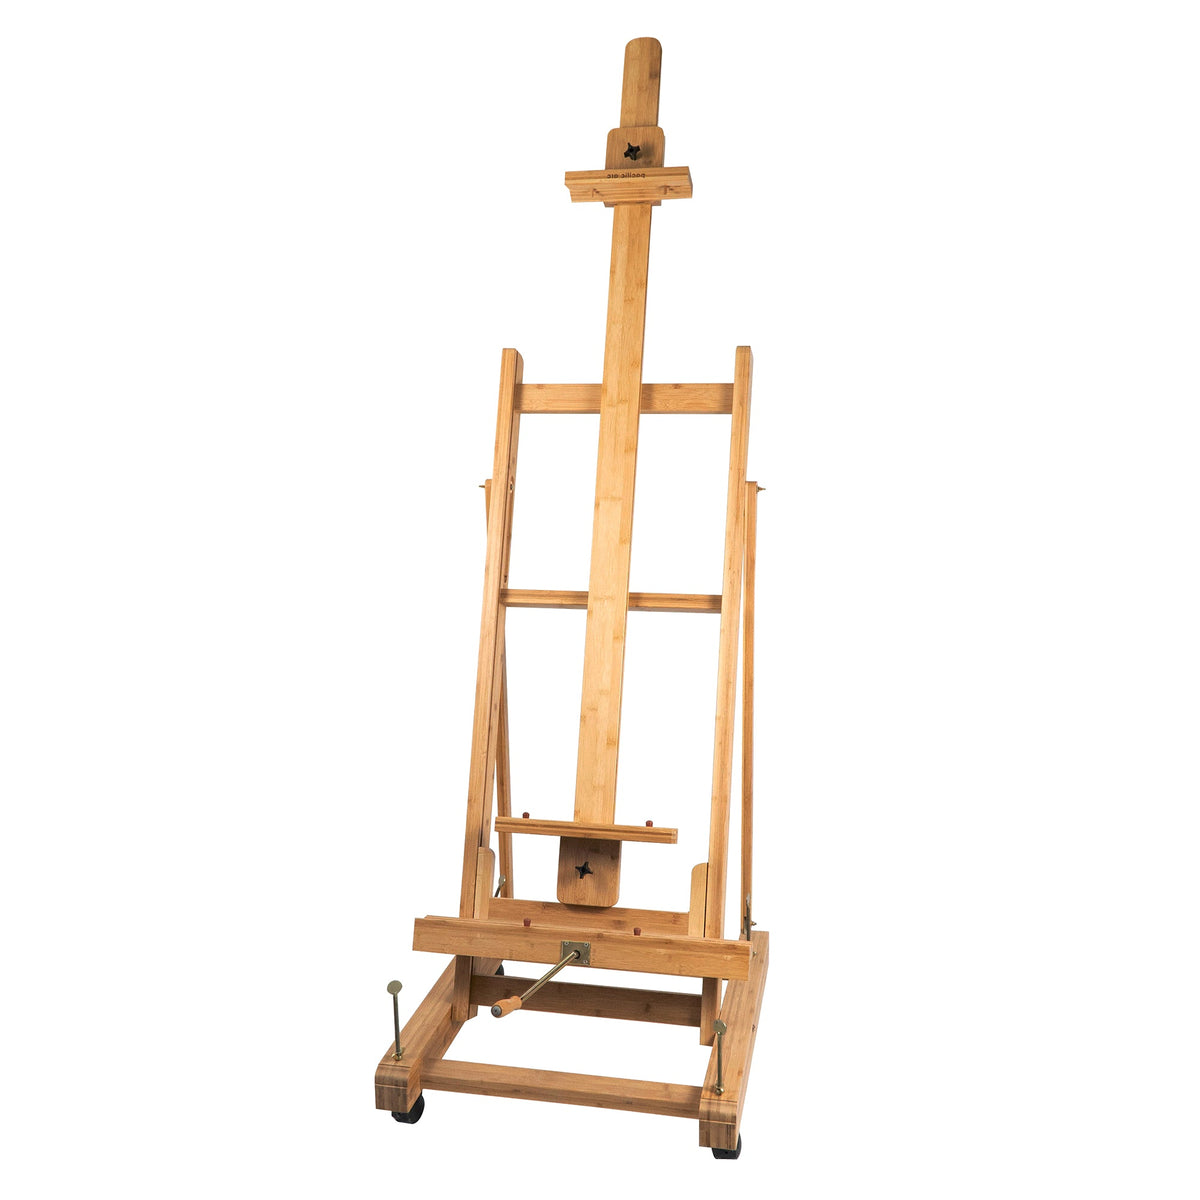 Pacific Arc - Professional Bamboo Studio Easel with Casters and Center Tray, 89 Inch Canvases for Watercolors, Painting, Sketching, Drawing, and Display